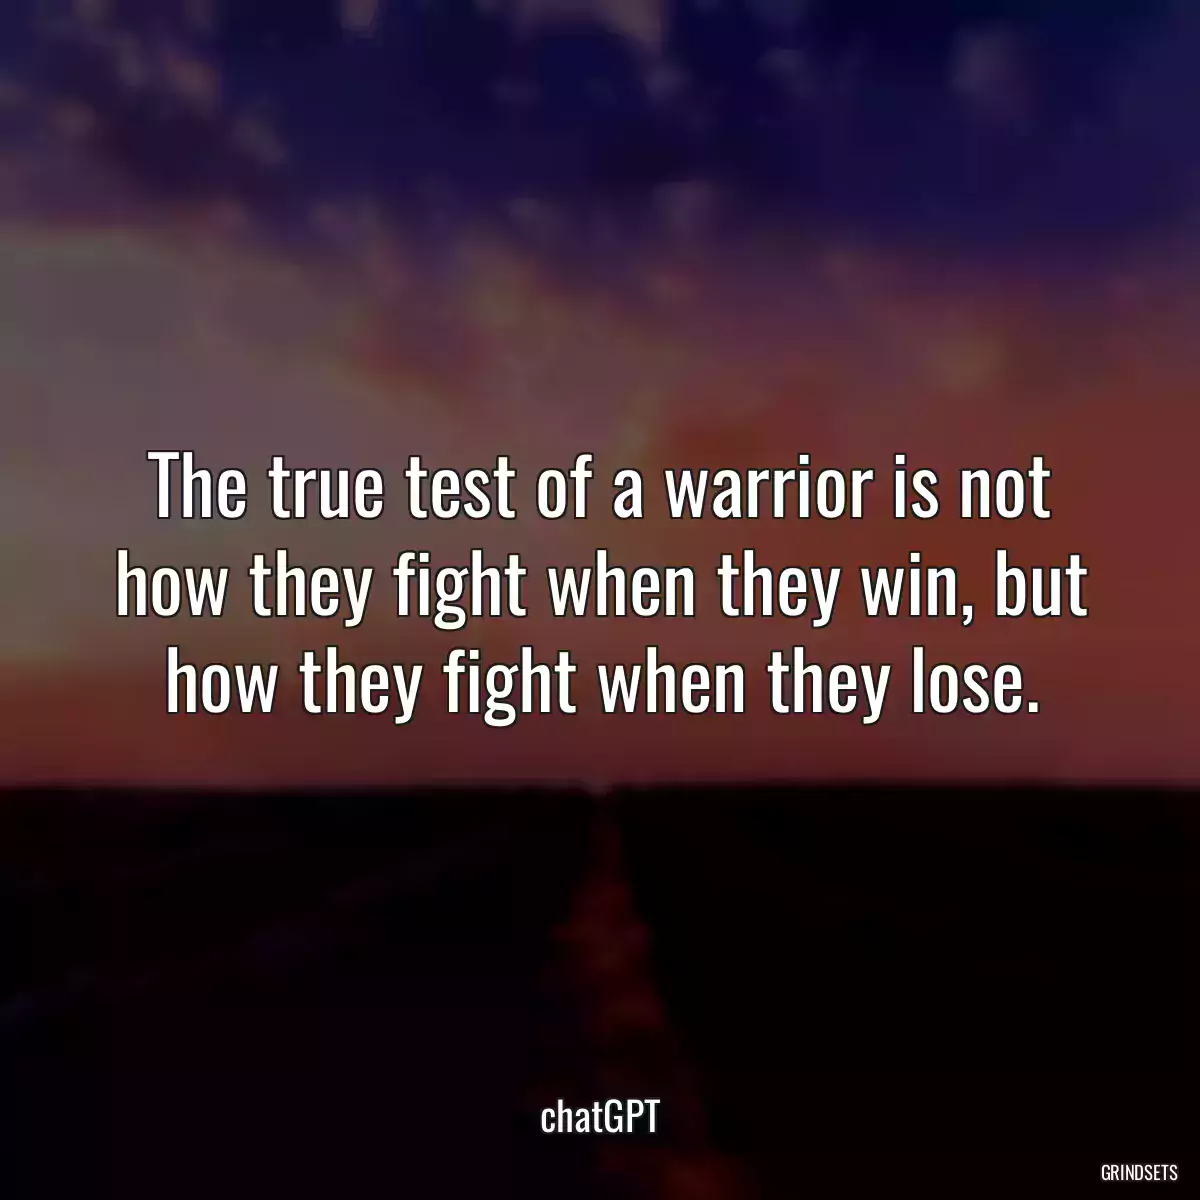 The true test of a warrior is not how they fight when they win, but how they fight when they lose.